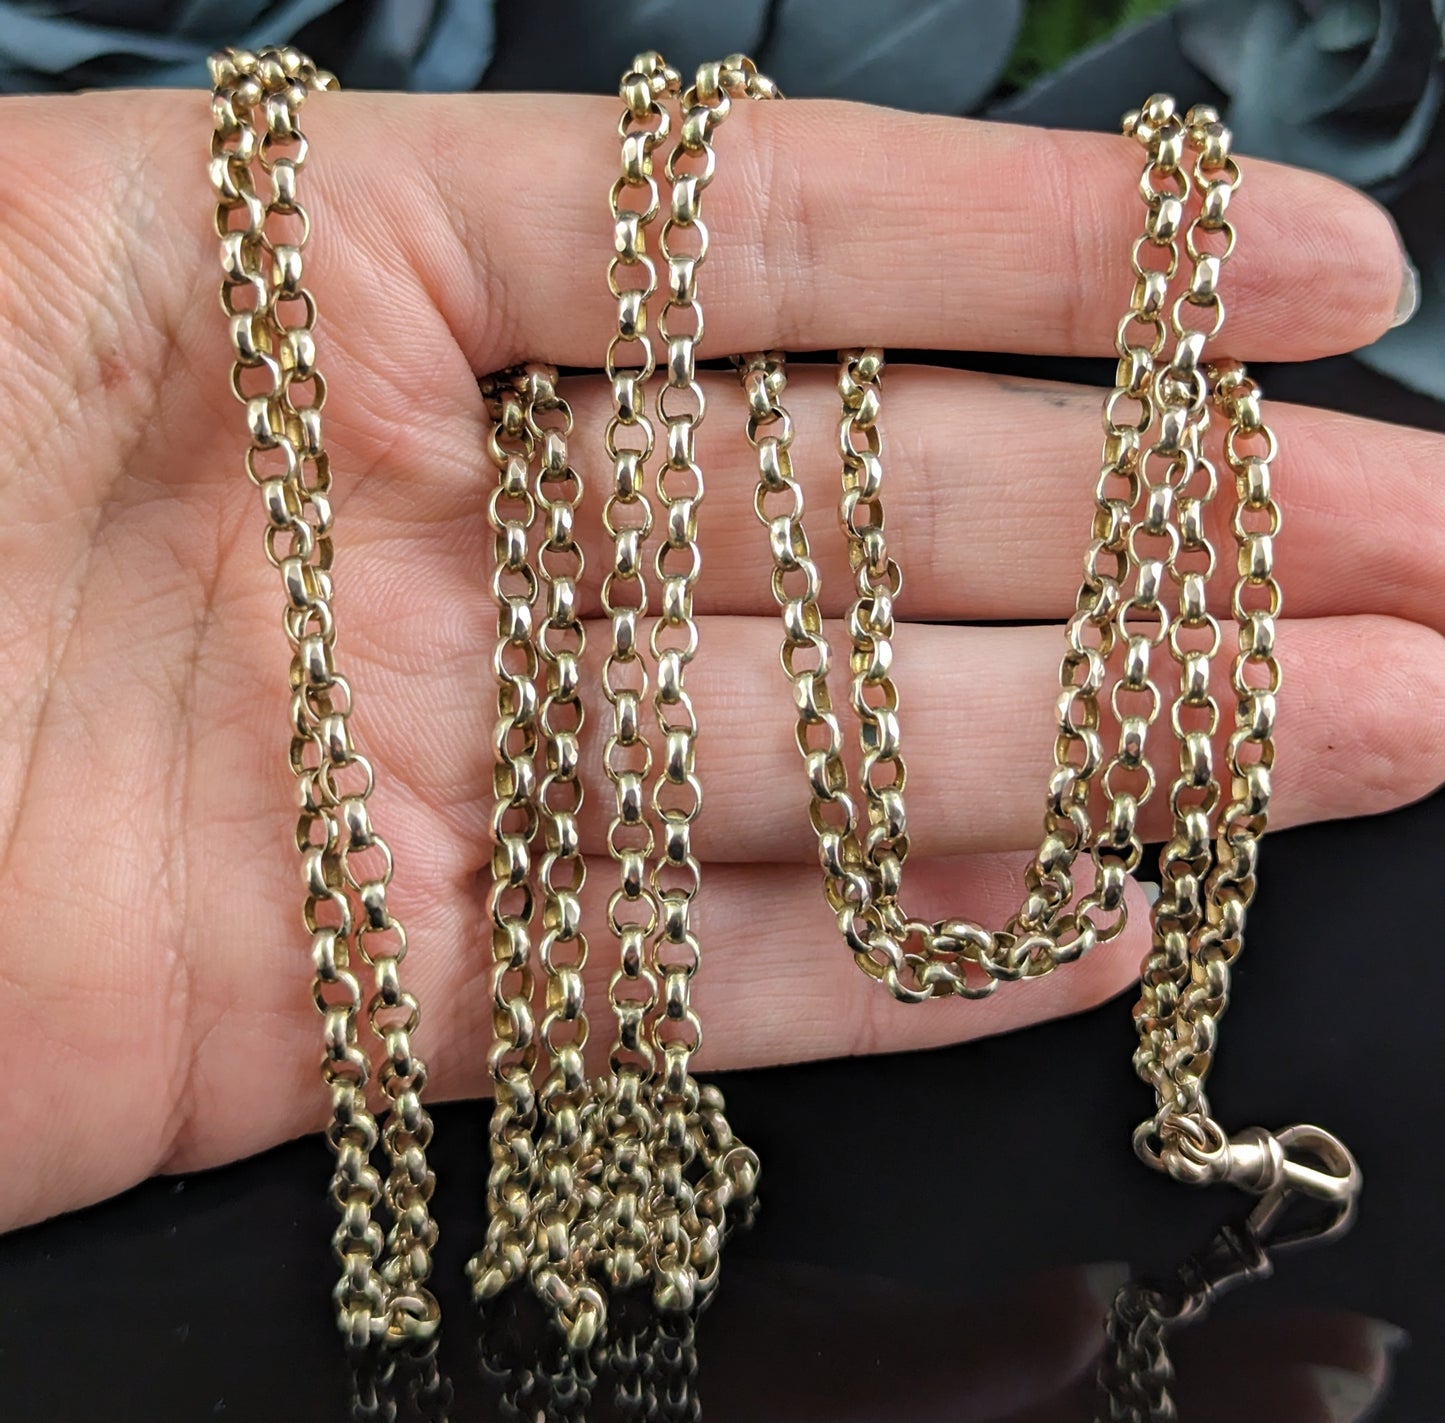 Antique 9ct gold longuard chain necklace, muff chain, Rolo link